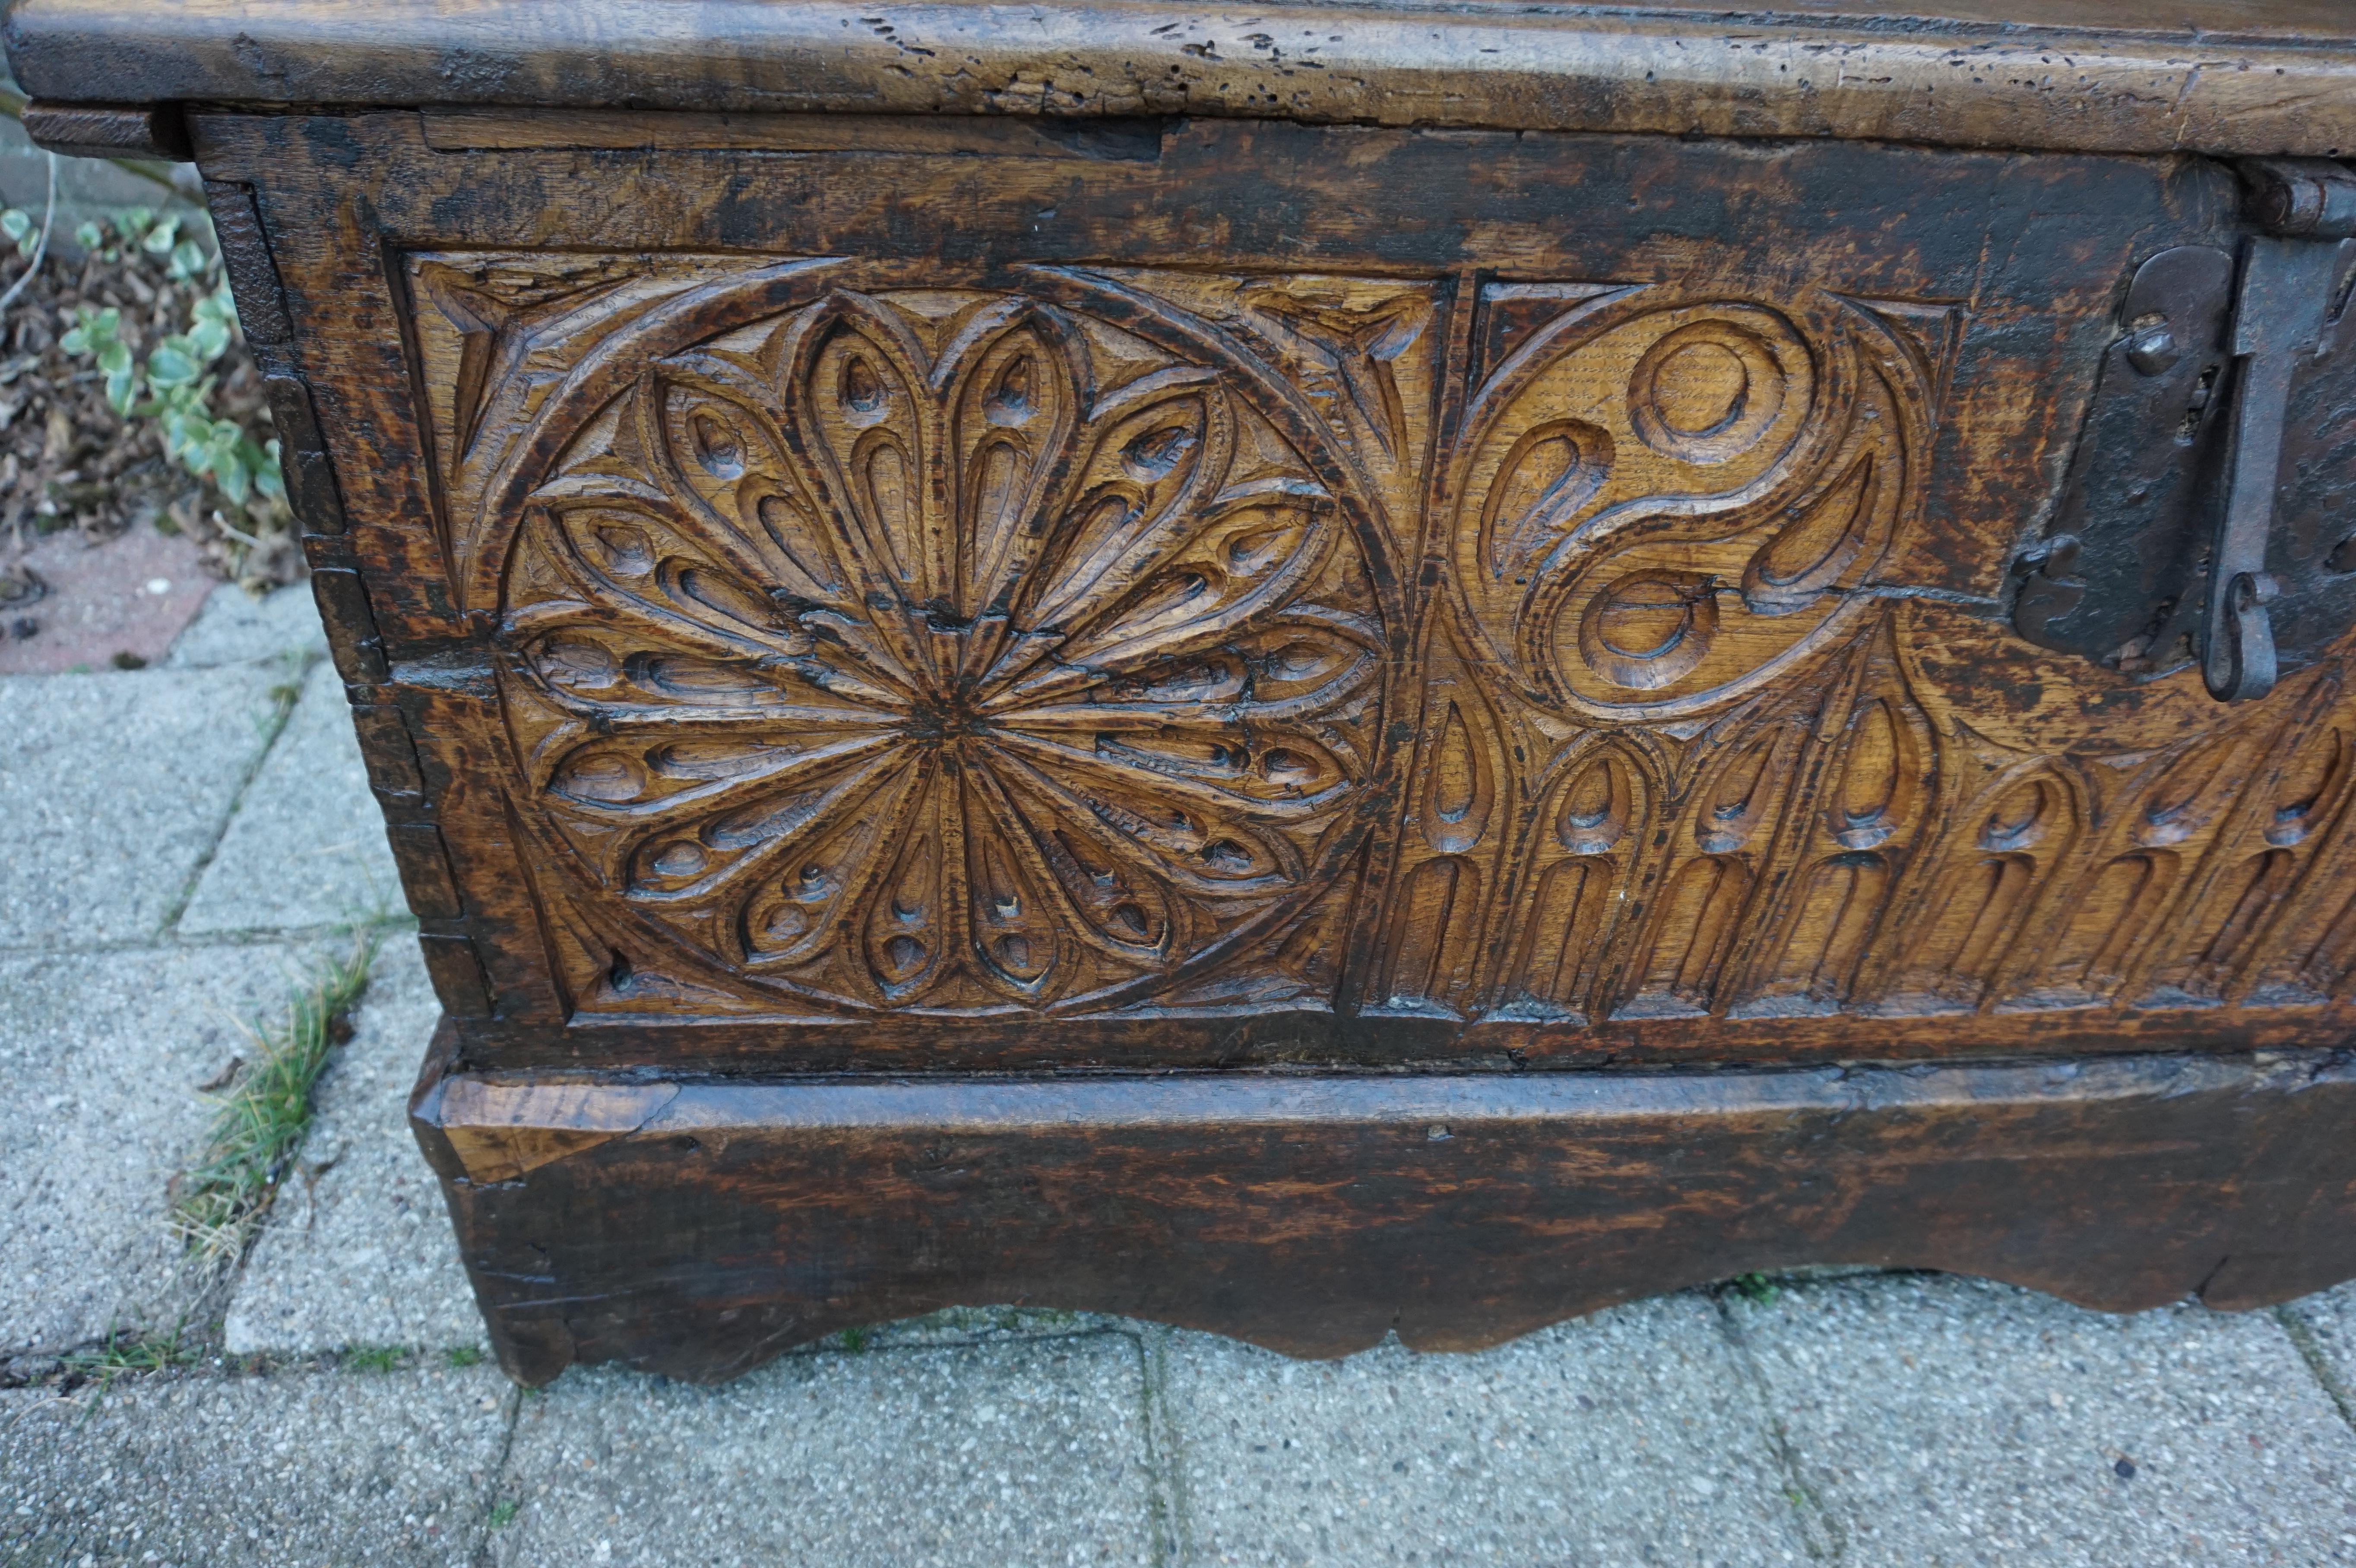 Spanish Antique Gothic Revival Blanket Chest / Trunk with an Amazing Patina 1680 - 1720